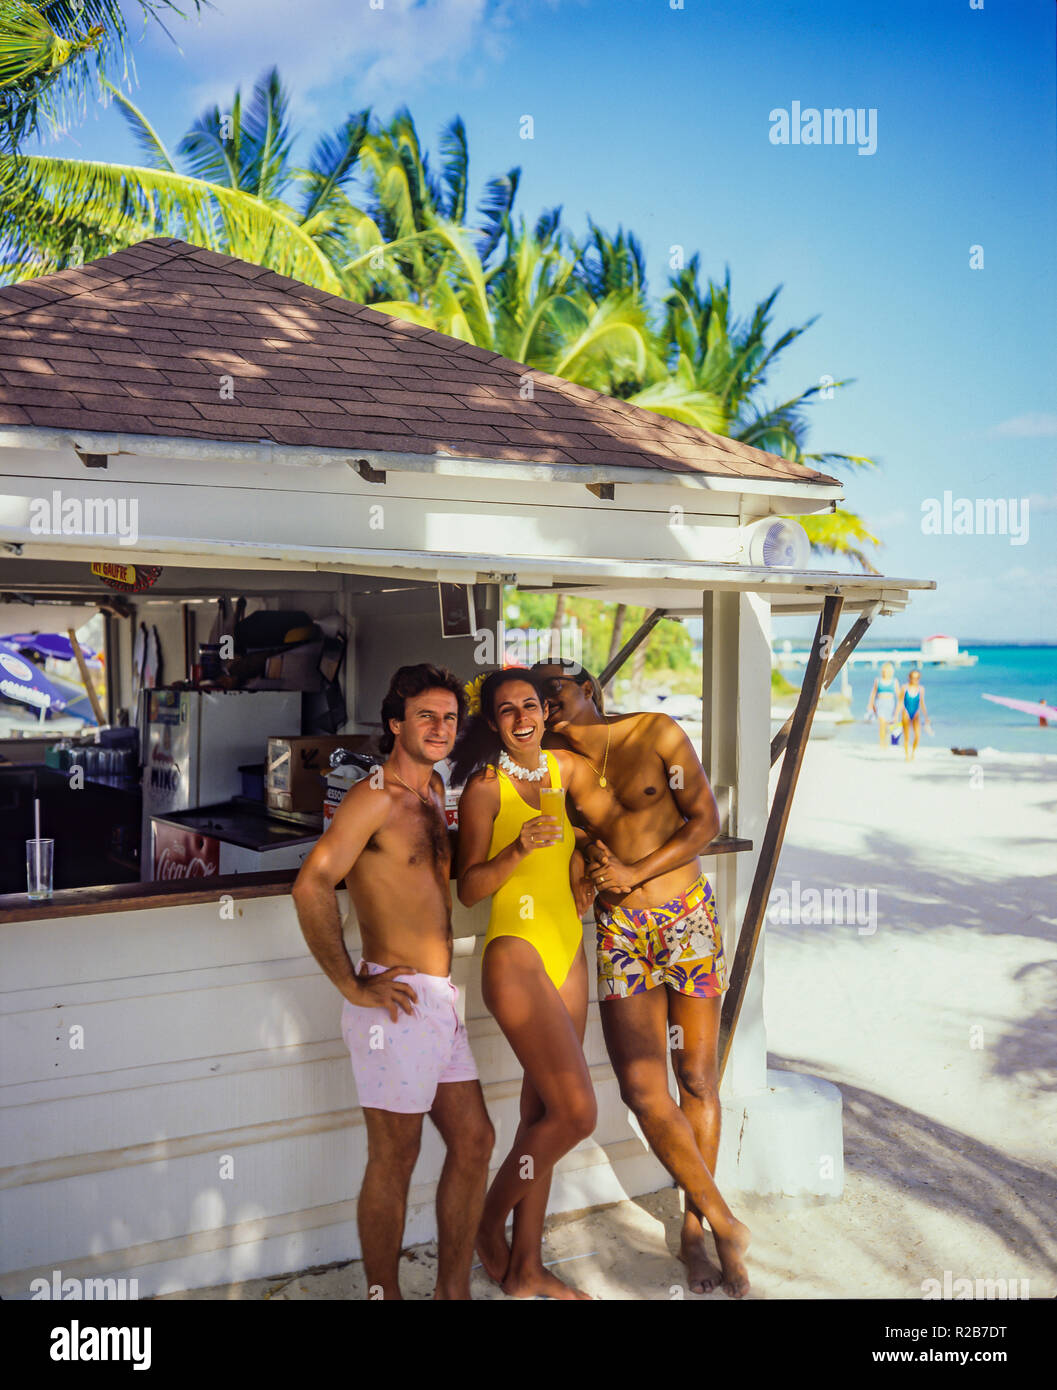 Young woman and 2 young men having fun at beach bar, tropical beach, Saint-François, Guadeloupe, French West Indies, Stock Photo